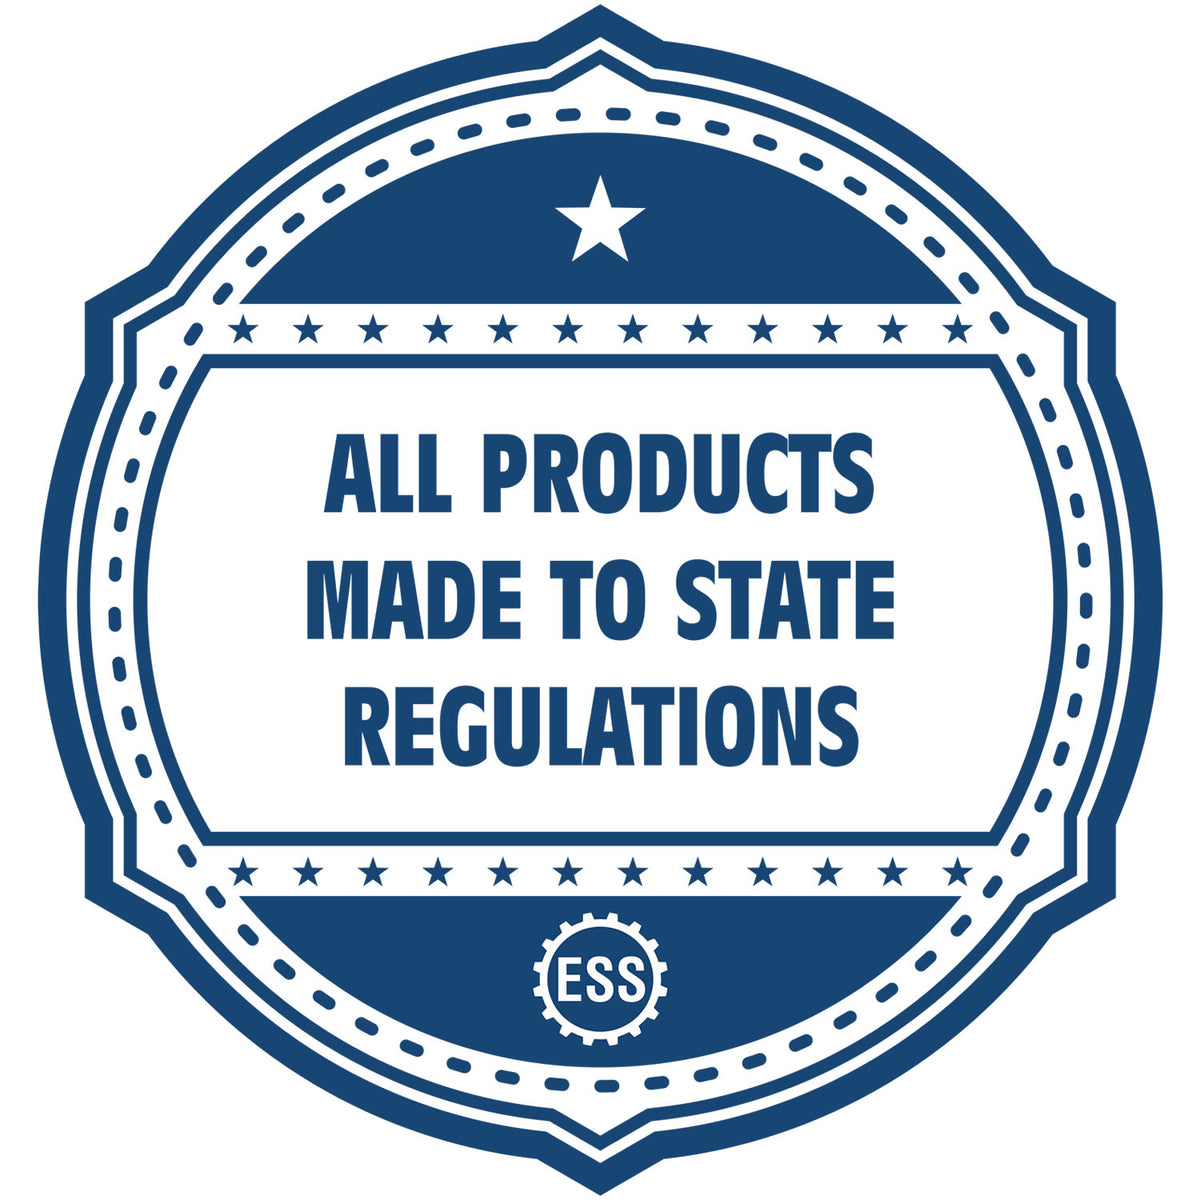 An icon or badge element for the Self-Inking Oklahoma Landscape Architect Stamp showing that this product is made in compliance with state regulations.